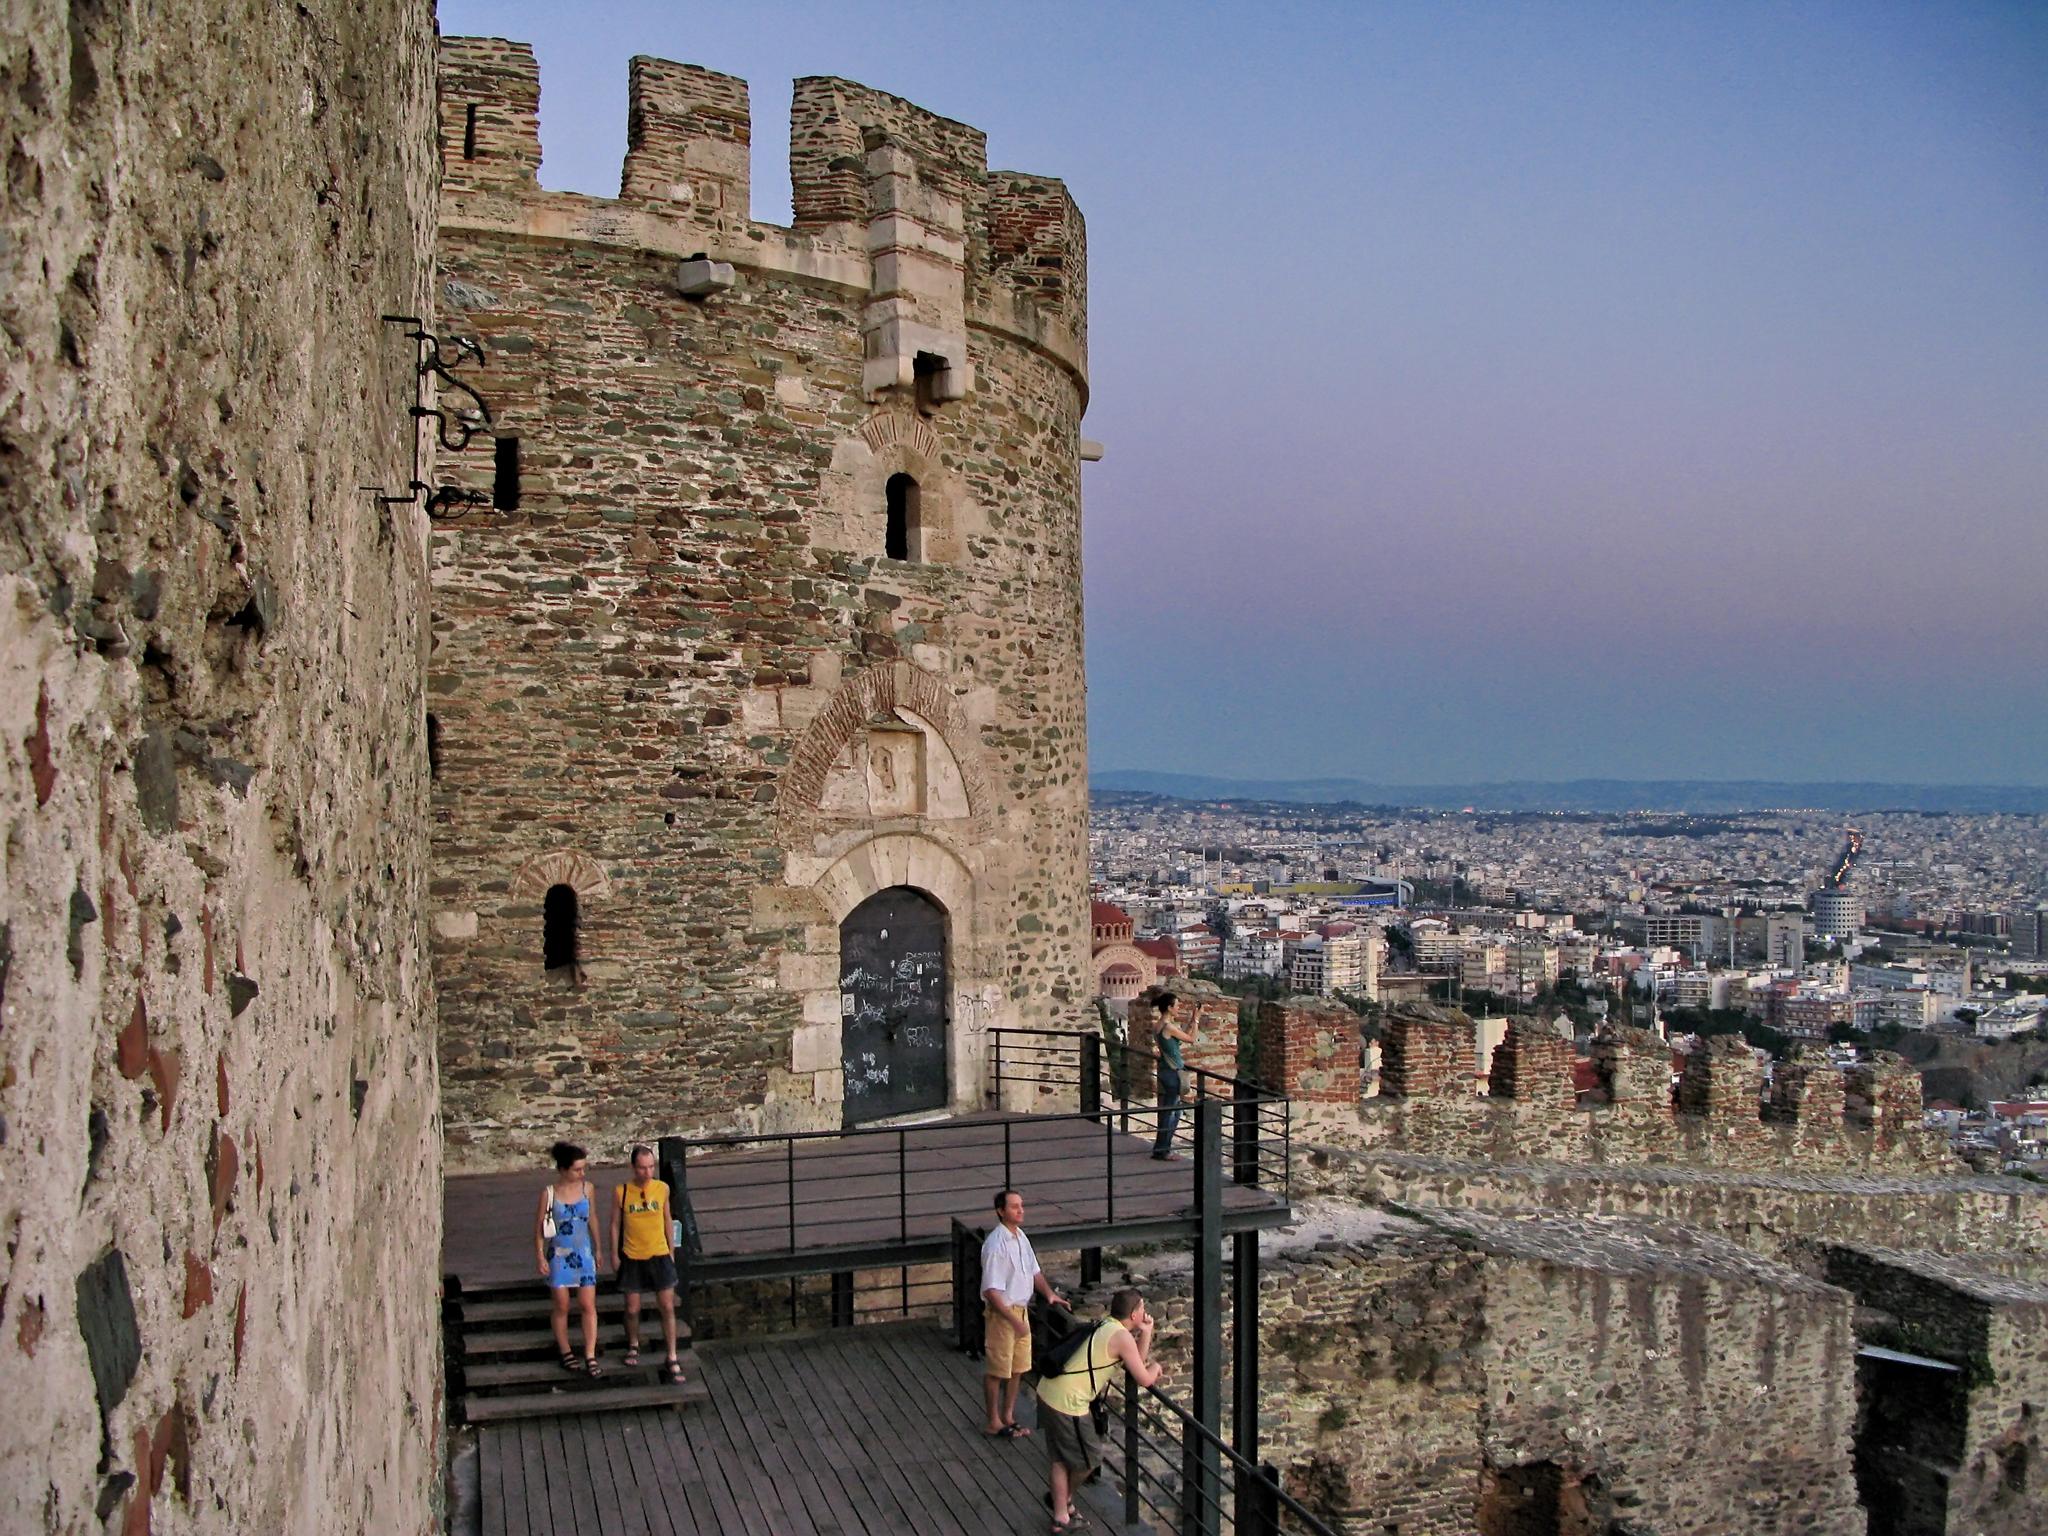 Thessaloniki’s White Tower is a museum, a monument and the symbol of the city